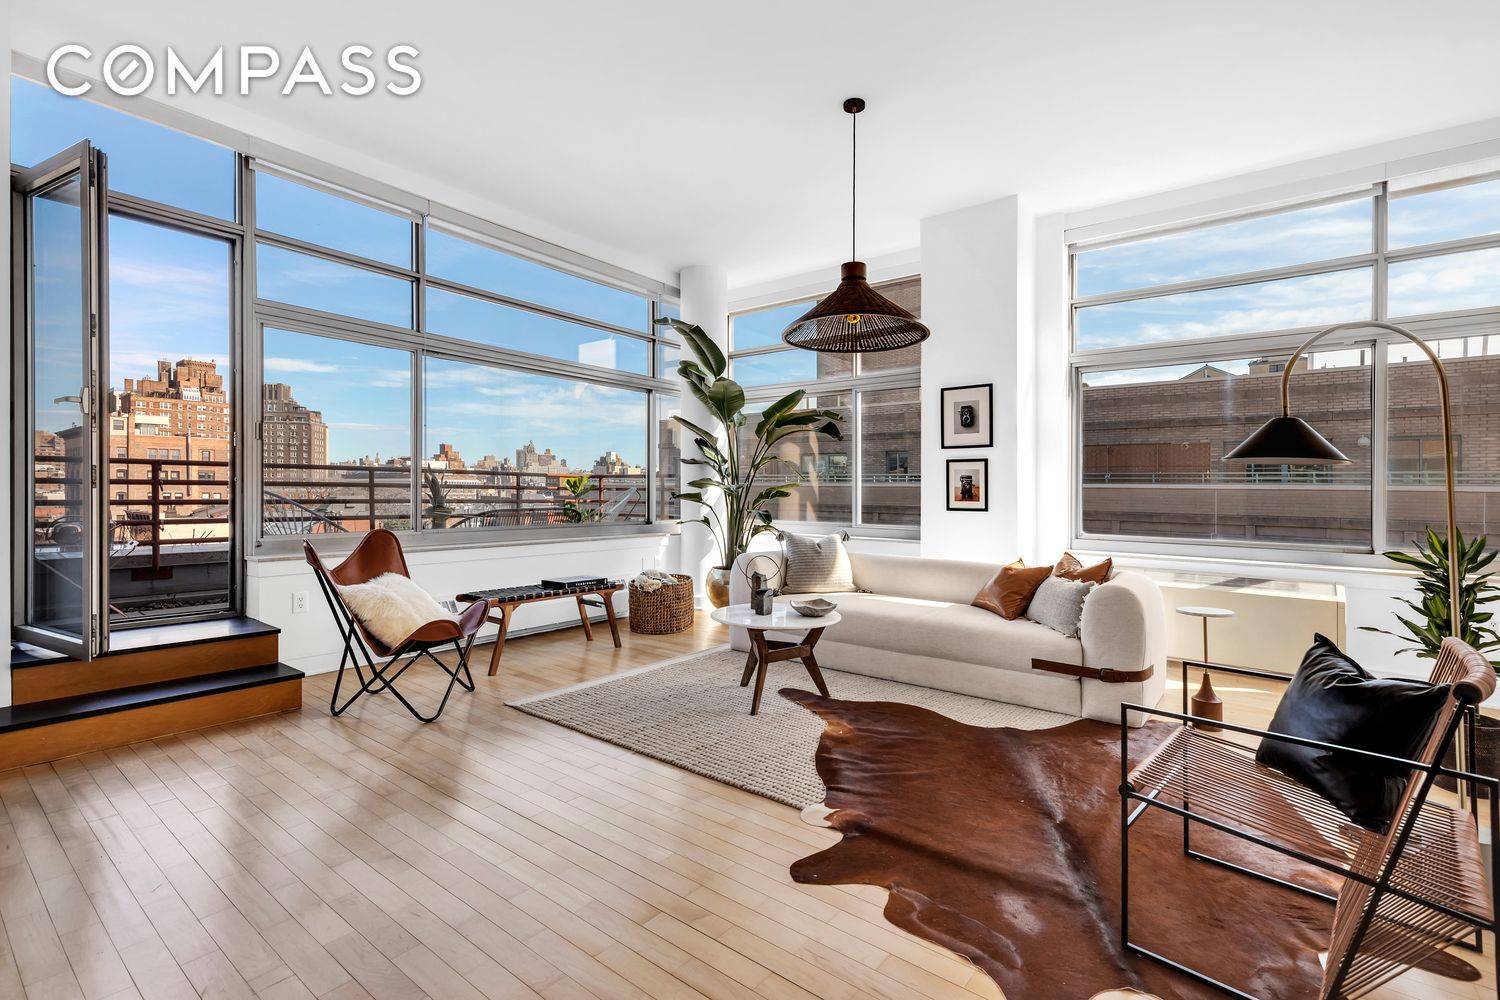 Iconic 2000sf space w private terrace Perched overlooking the West Village, enjoy sun filled, loft line living in the tower section with 11 foot ceilings.